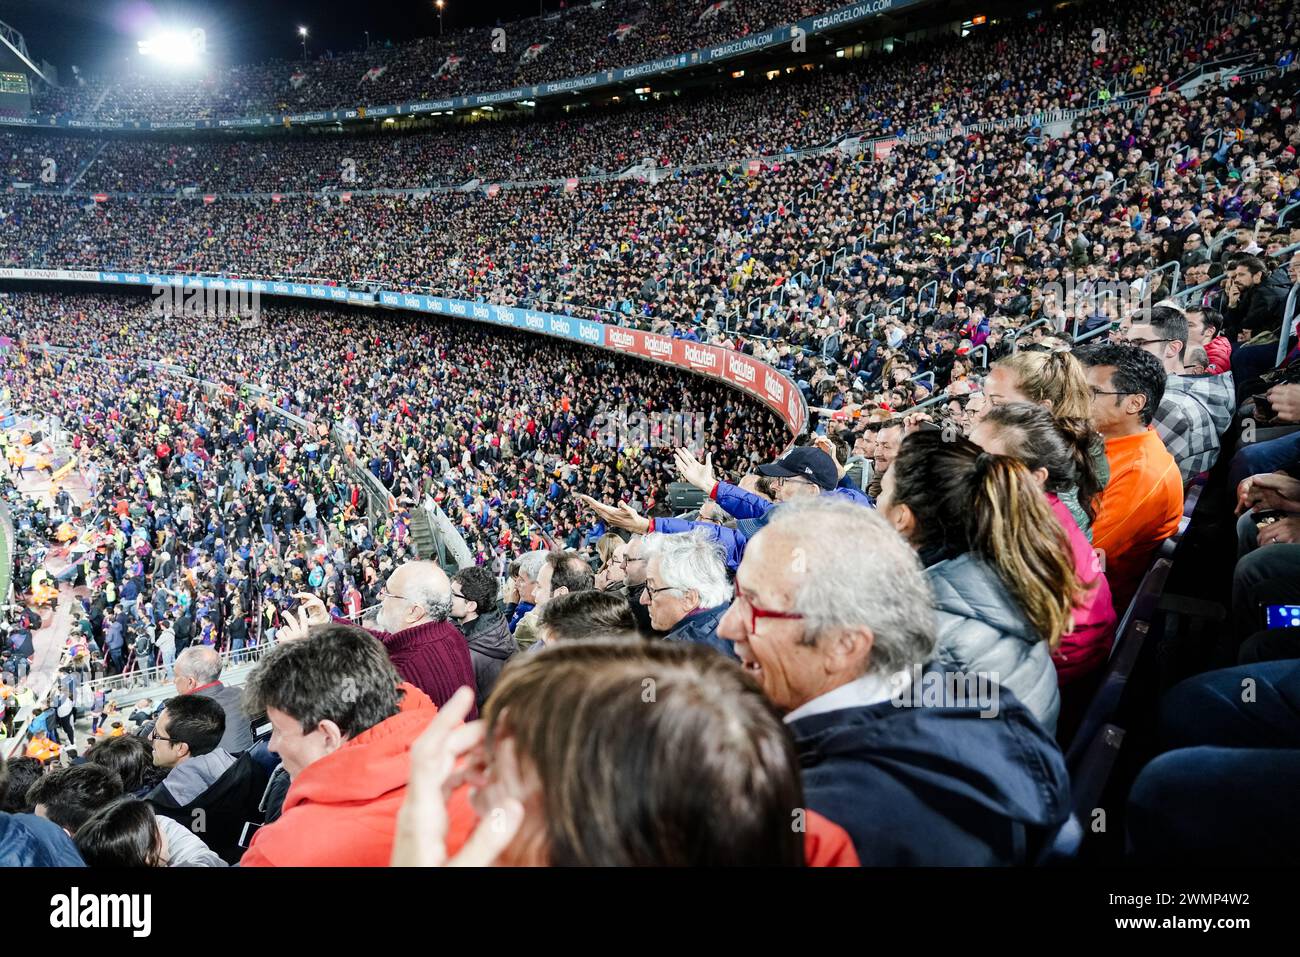 CROWD ERUPTS, FINAL WHISTLE, BARCELONA FC, TITLE CELEBRATION 2019: Barcelona fans at Camp Nou celebrate winning the La Liga title in style. The final game of the La Liga 2018-19 season in Spain between Barcelona FC and Levante at Camp Nou, Barcelona on 27 April 2019. Barca won the game 1-0 with a second half Messi goal to clinch back-to-back La Liga titles and their eighth in 11 years. Stock Photo